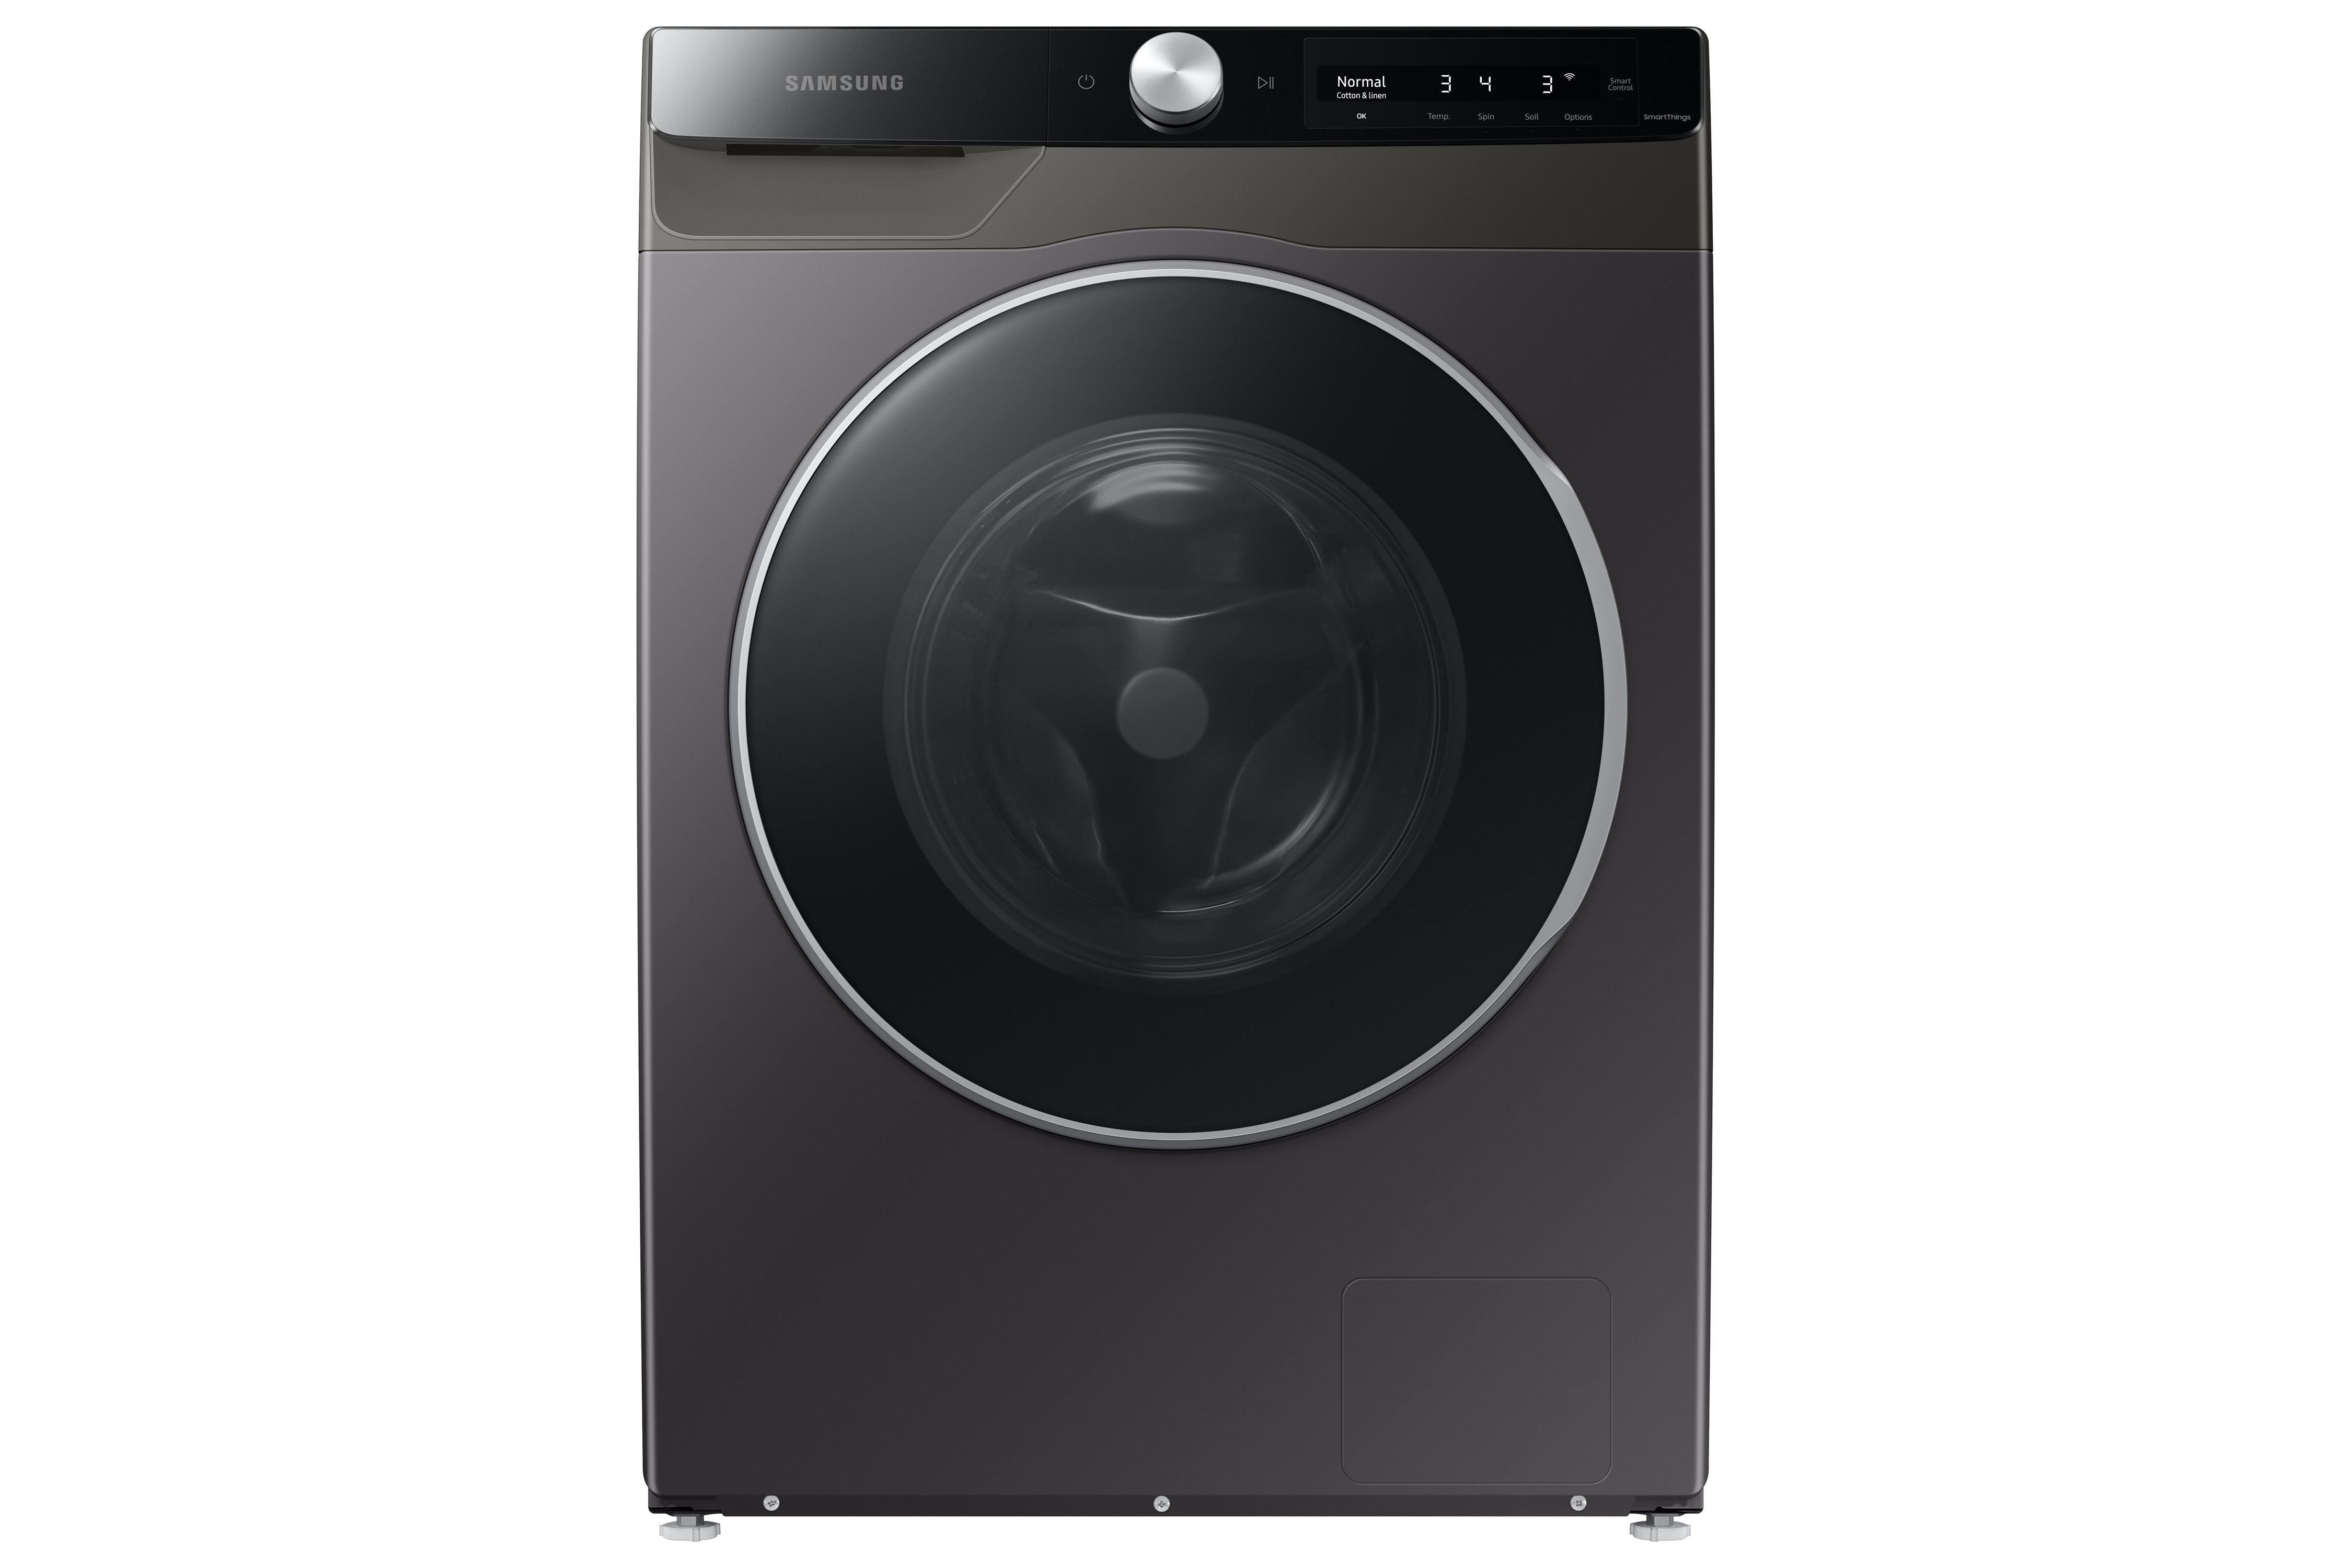 Samsung - 2.9 cu. Ft  Front Load Washer in Grey - WW25B6900AX